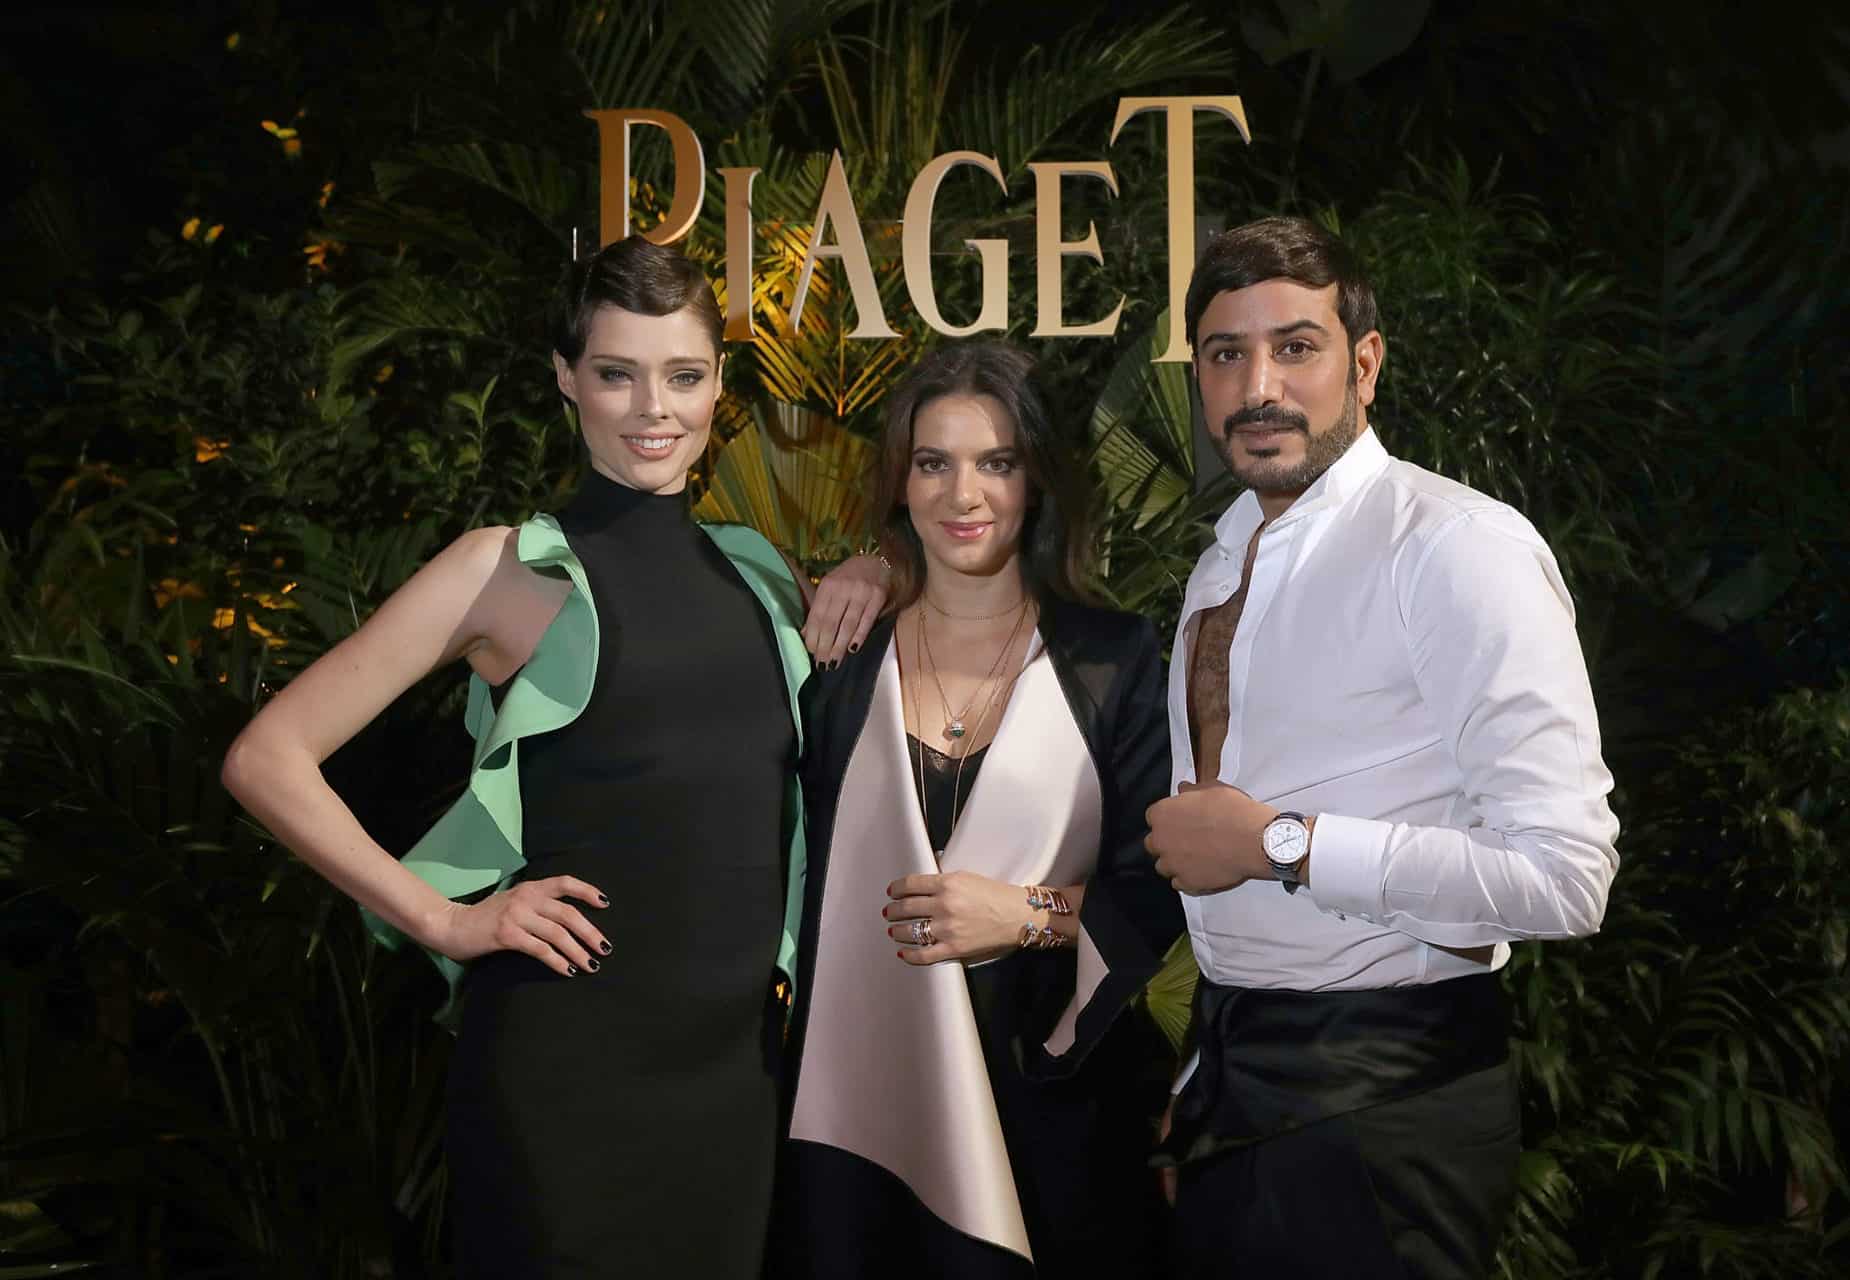 GENEVA, SWITZERLAND - JANUARY 15: (L-R) Coco Rocha, Piaget CEO Chabi Nouri and Mohammed Sultan Al Habtoor attend the #Piaget dinner at the Country Club during the #SIHH2018 on January 15, 2018 in Geneva, Switzerland.  (Photo by Remy Steiner/Getty Images for Piaget) *** Local Caption *** Mohammed Sultan Al Habtoor; Chabi Nouri; Coco Rocha